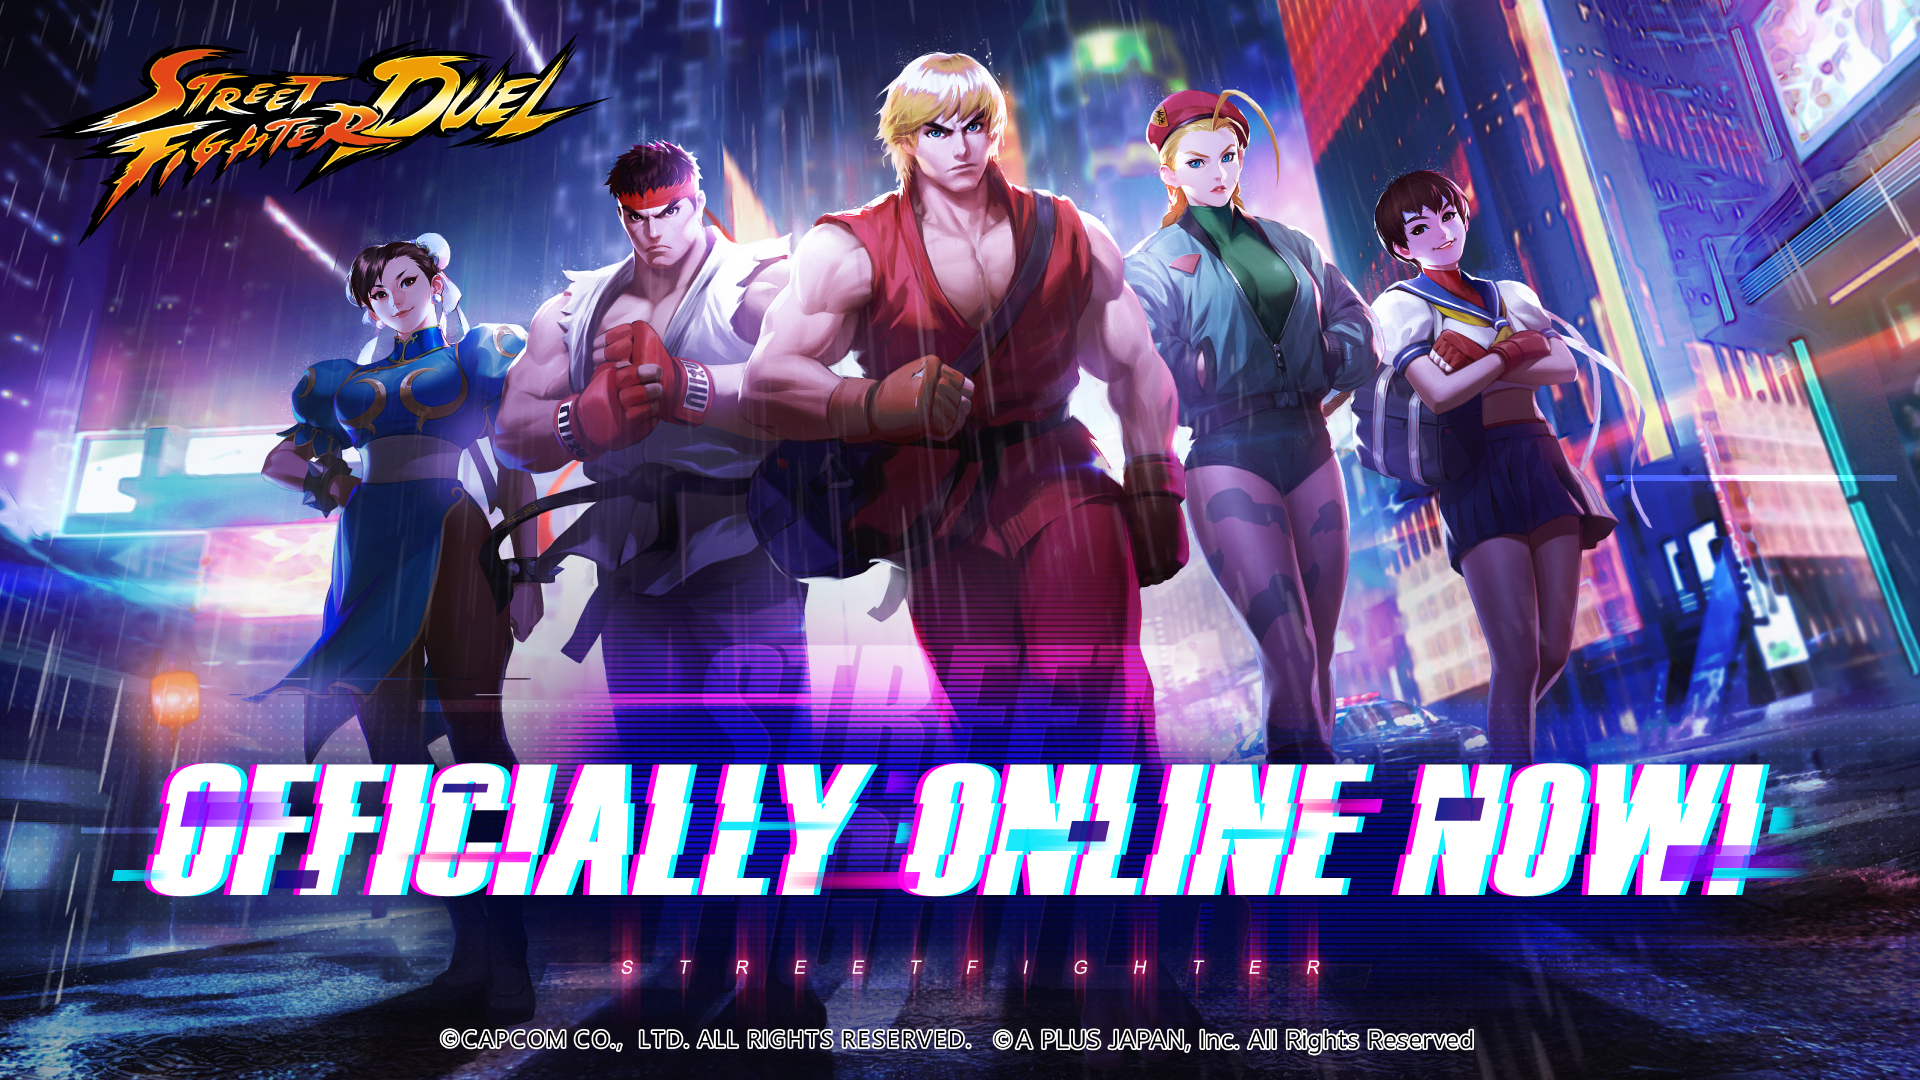 NEW* GLOBAL MOBILE GAME STREET FIGHTER: DUEL GAMEPLAY & PRE-REGISTER NOW!!!  